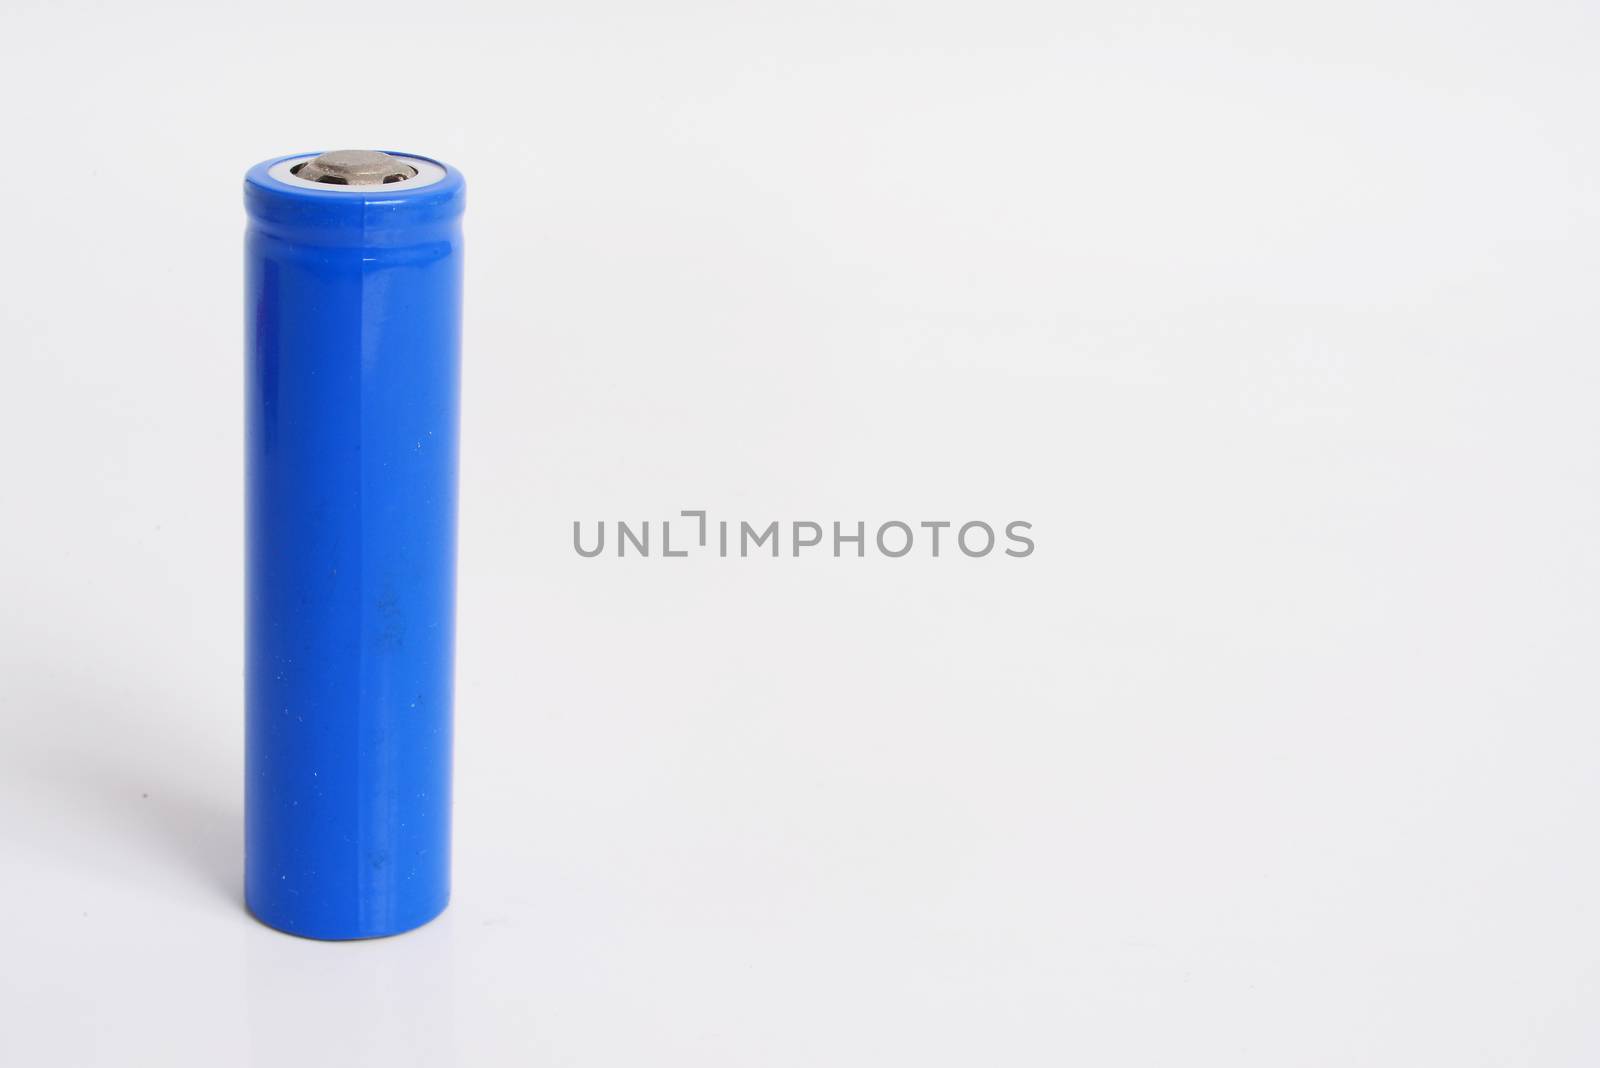 Blue 18650 Rechargeable Li-ion Battery on white background